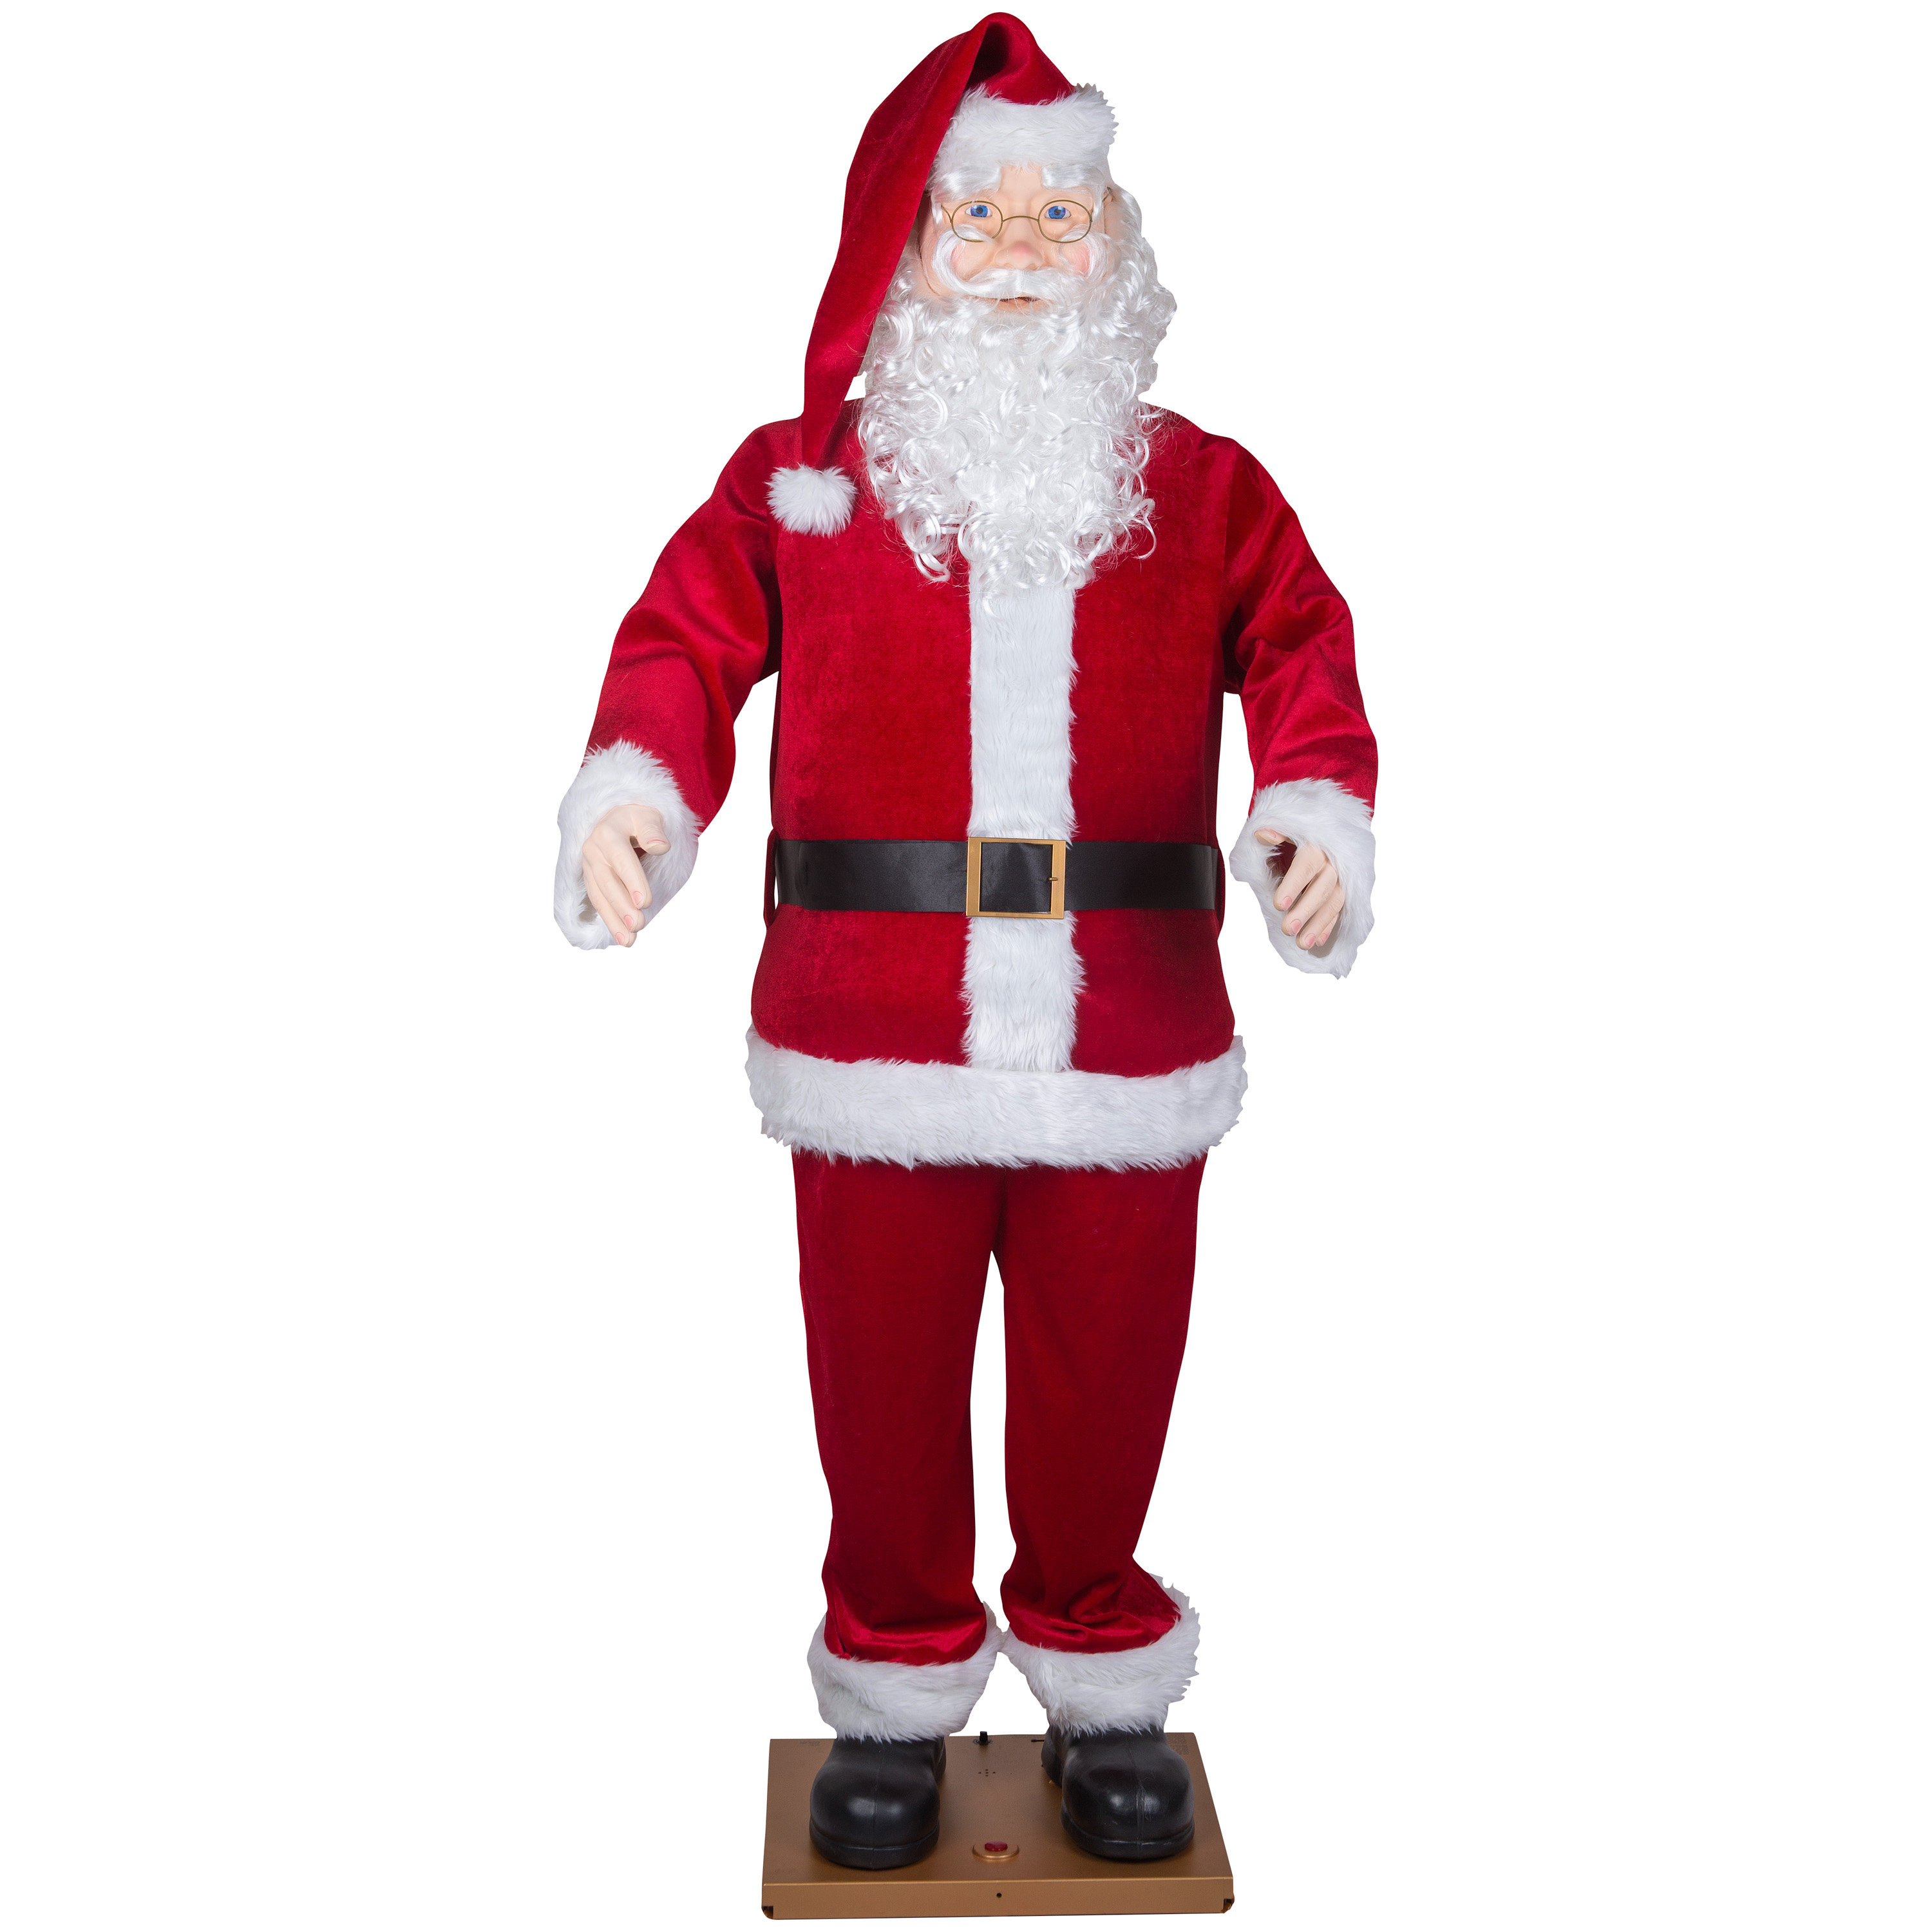 5.8 foot tall Life Sized Holiday Time Animated Dancing Santa Claus Christmas Décor